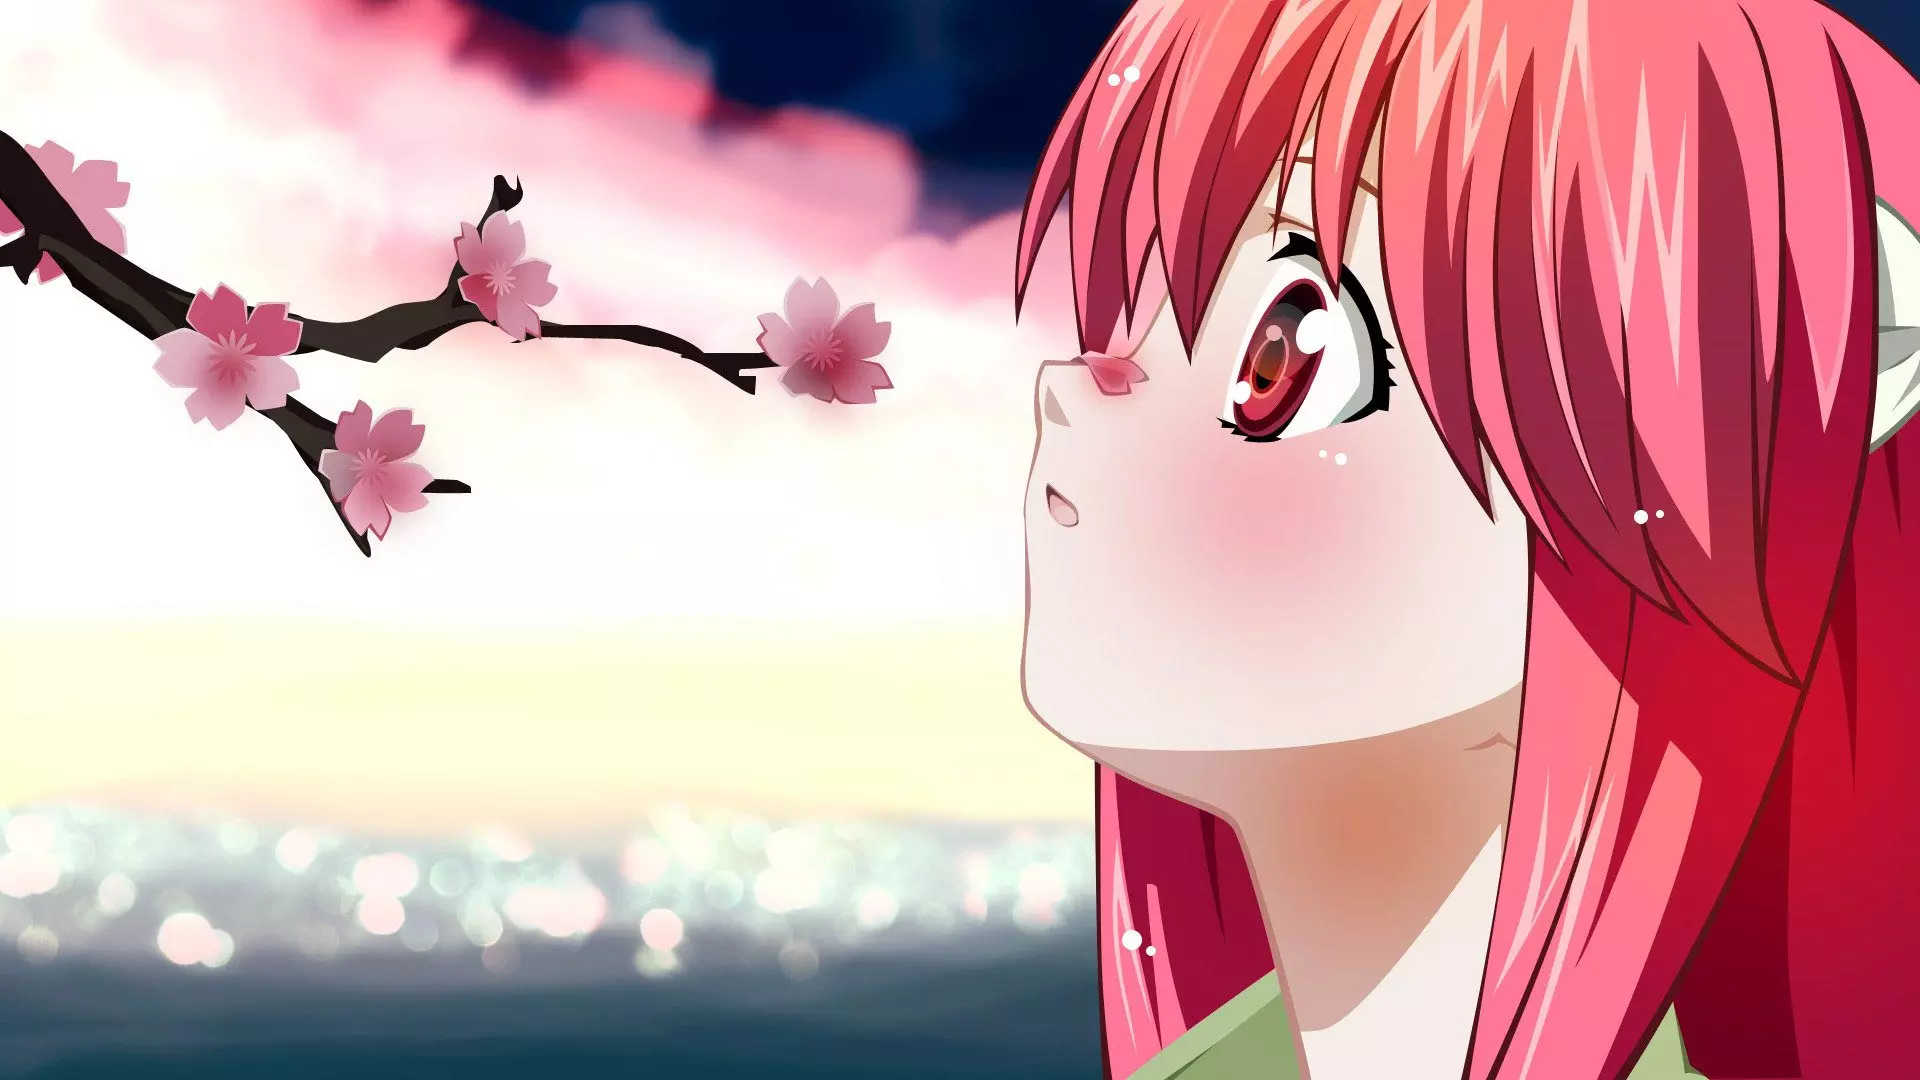 2. Lucy from Elfen Lied - wide 10